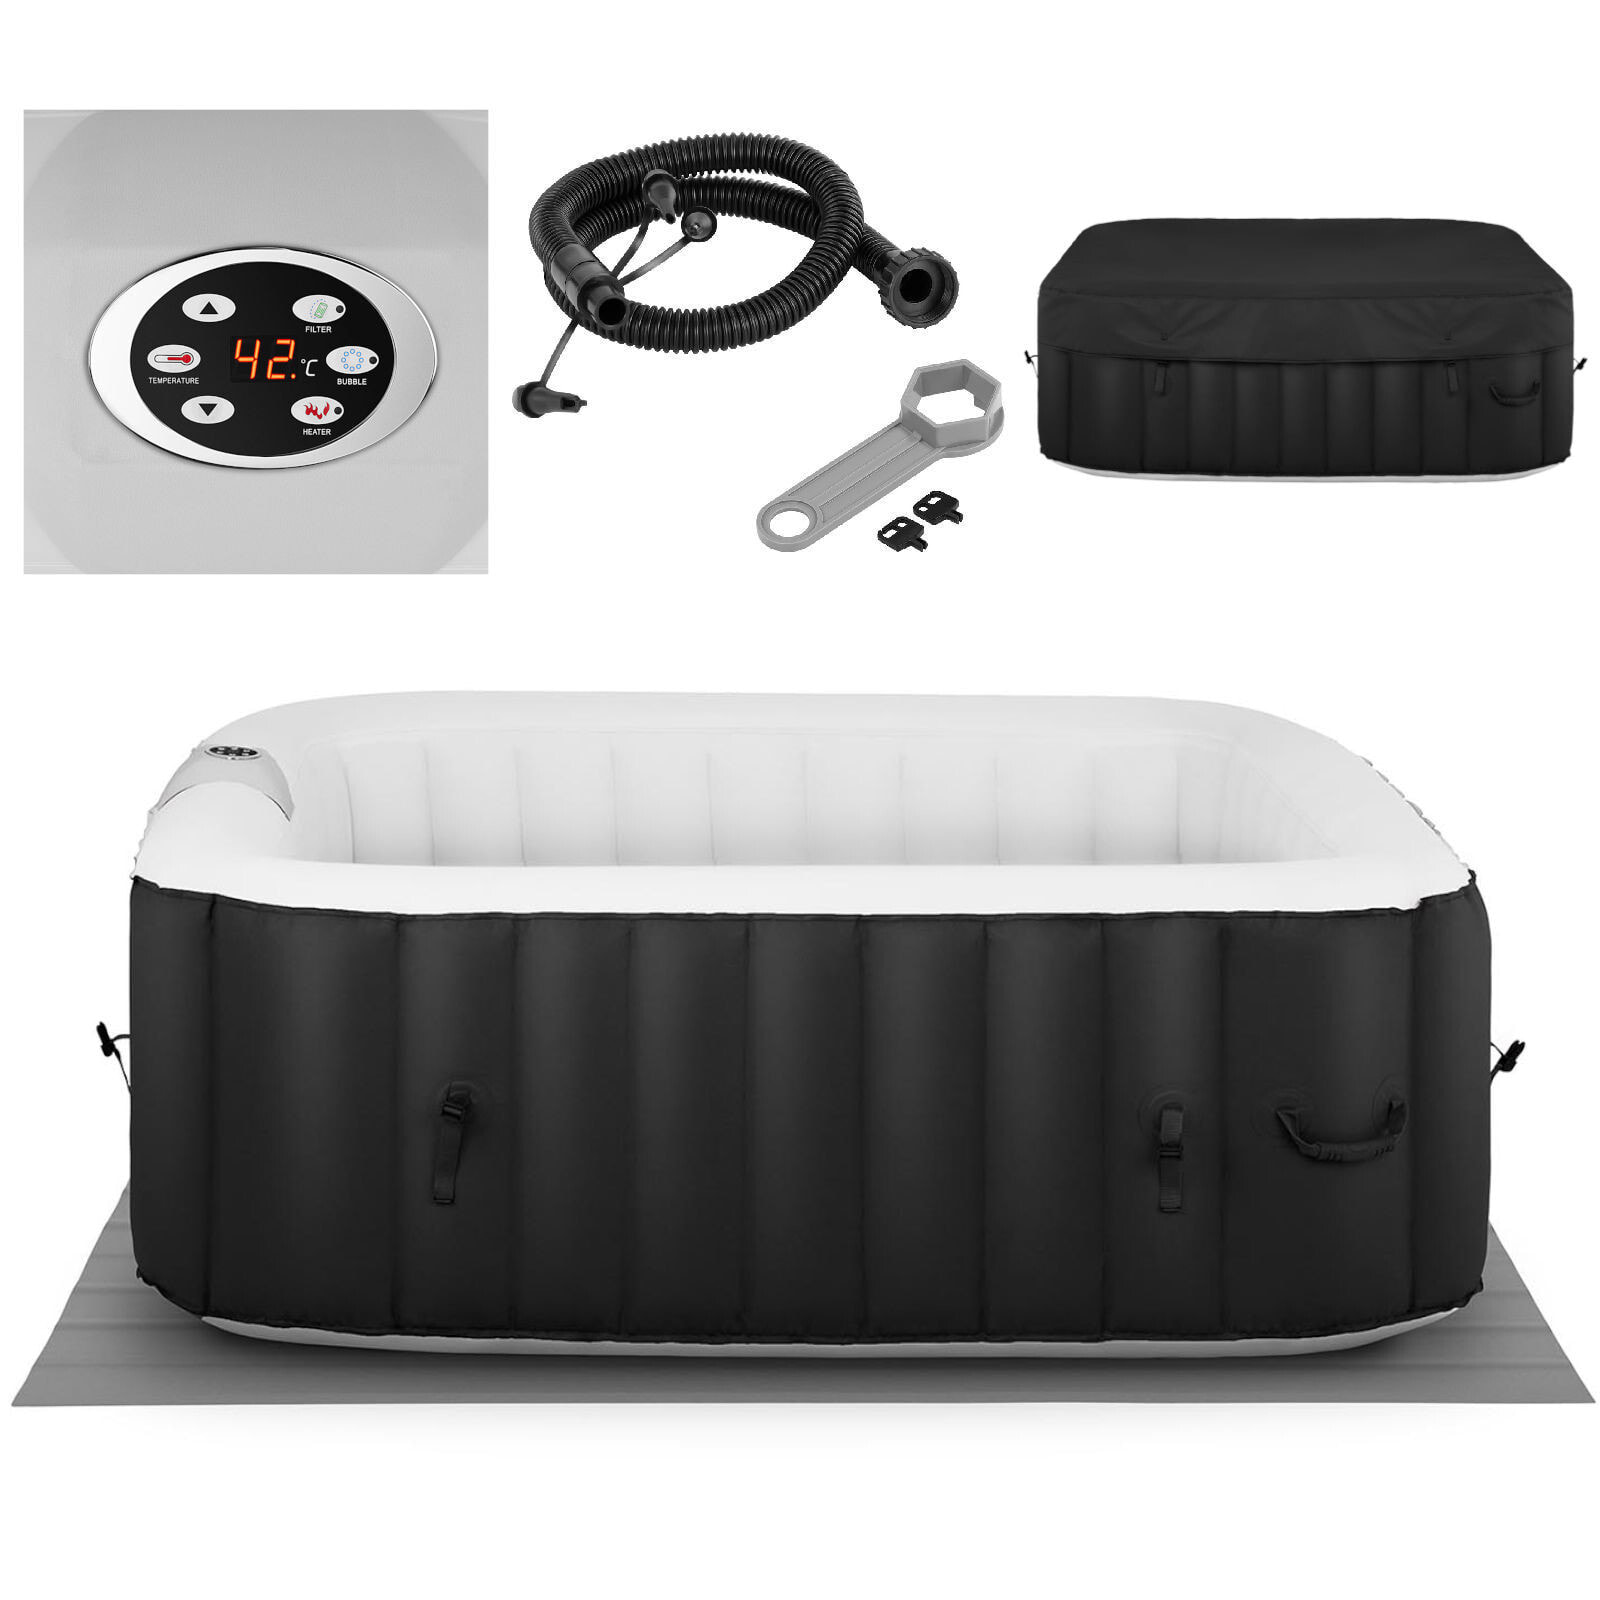 Garden inflatable jacuzzi with massage for 4 people 42C 600 l black and white